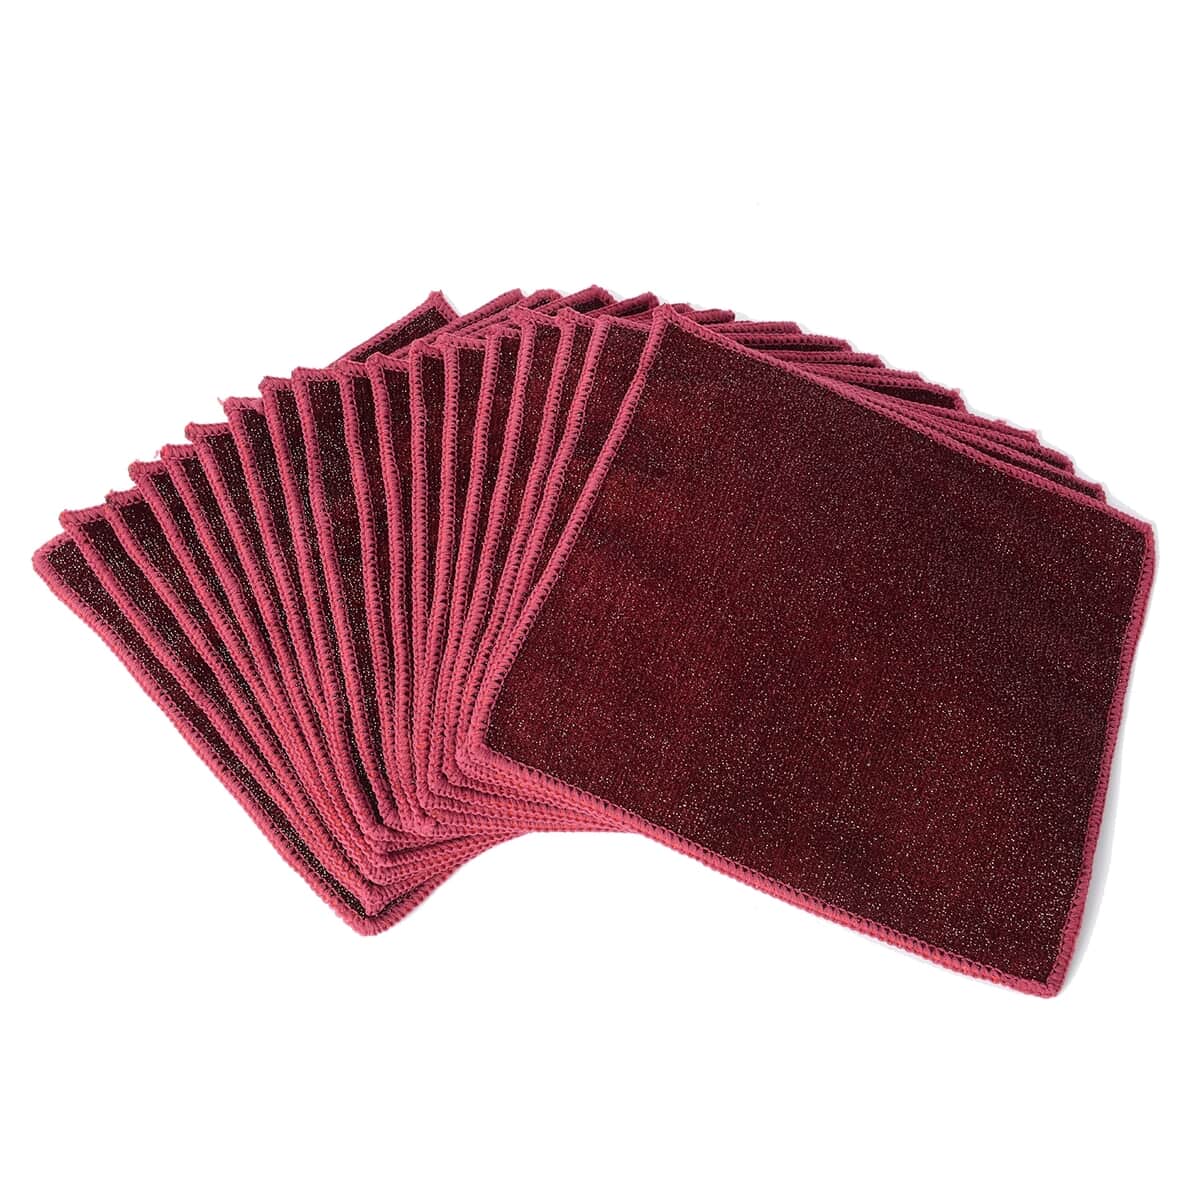 Homesmart Set of 20 Burgundy Double Sided Microfiber and Scratch Fiber Dish Cloth image number 4